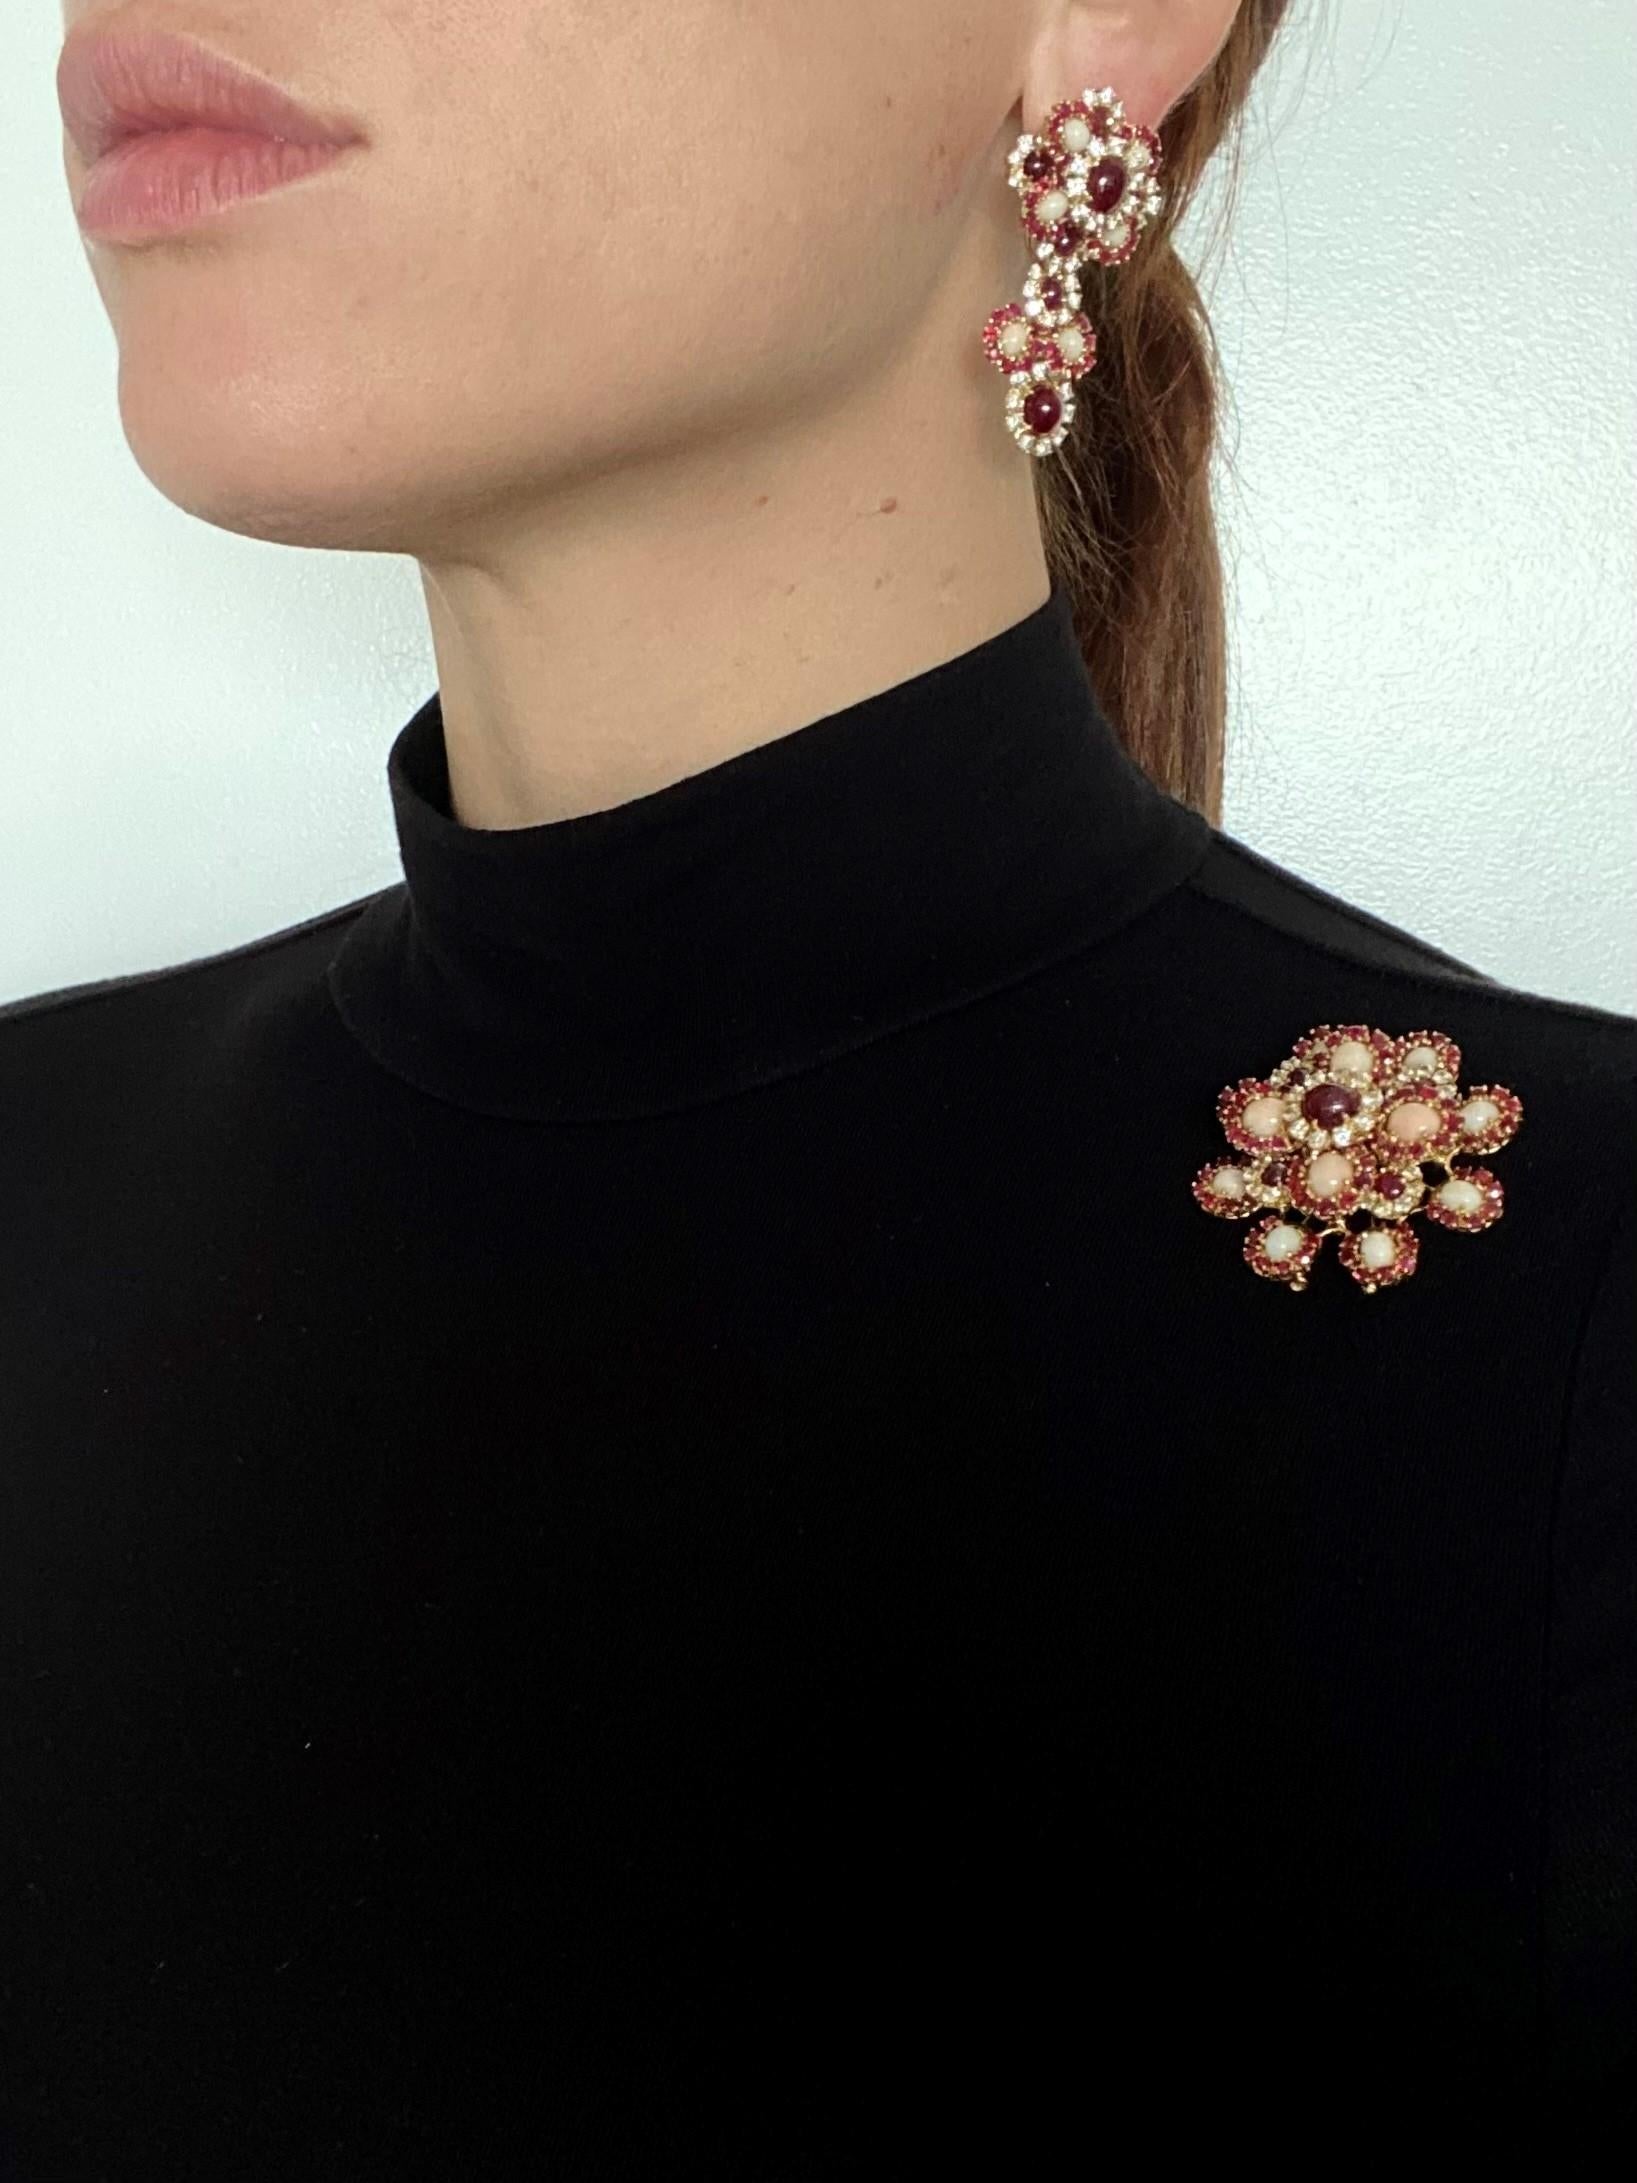 Fabulous earrings brooch suite designed by Pery Et Fils.

A statement pieces, created in Paris France at the jewelry atelier of Pery Et Fils, back in the 1960. This marvelous suite is composed by a pair of convertible day and night drops earrings